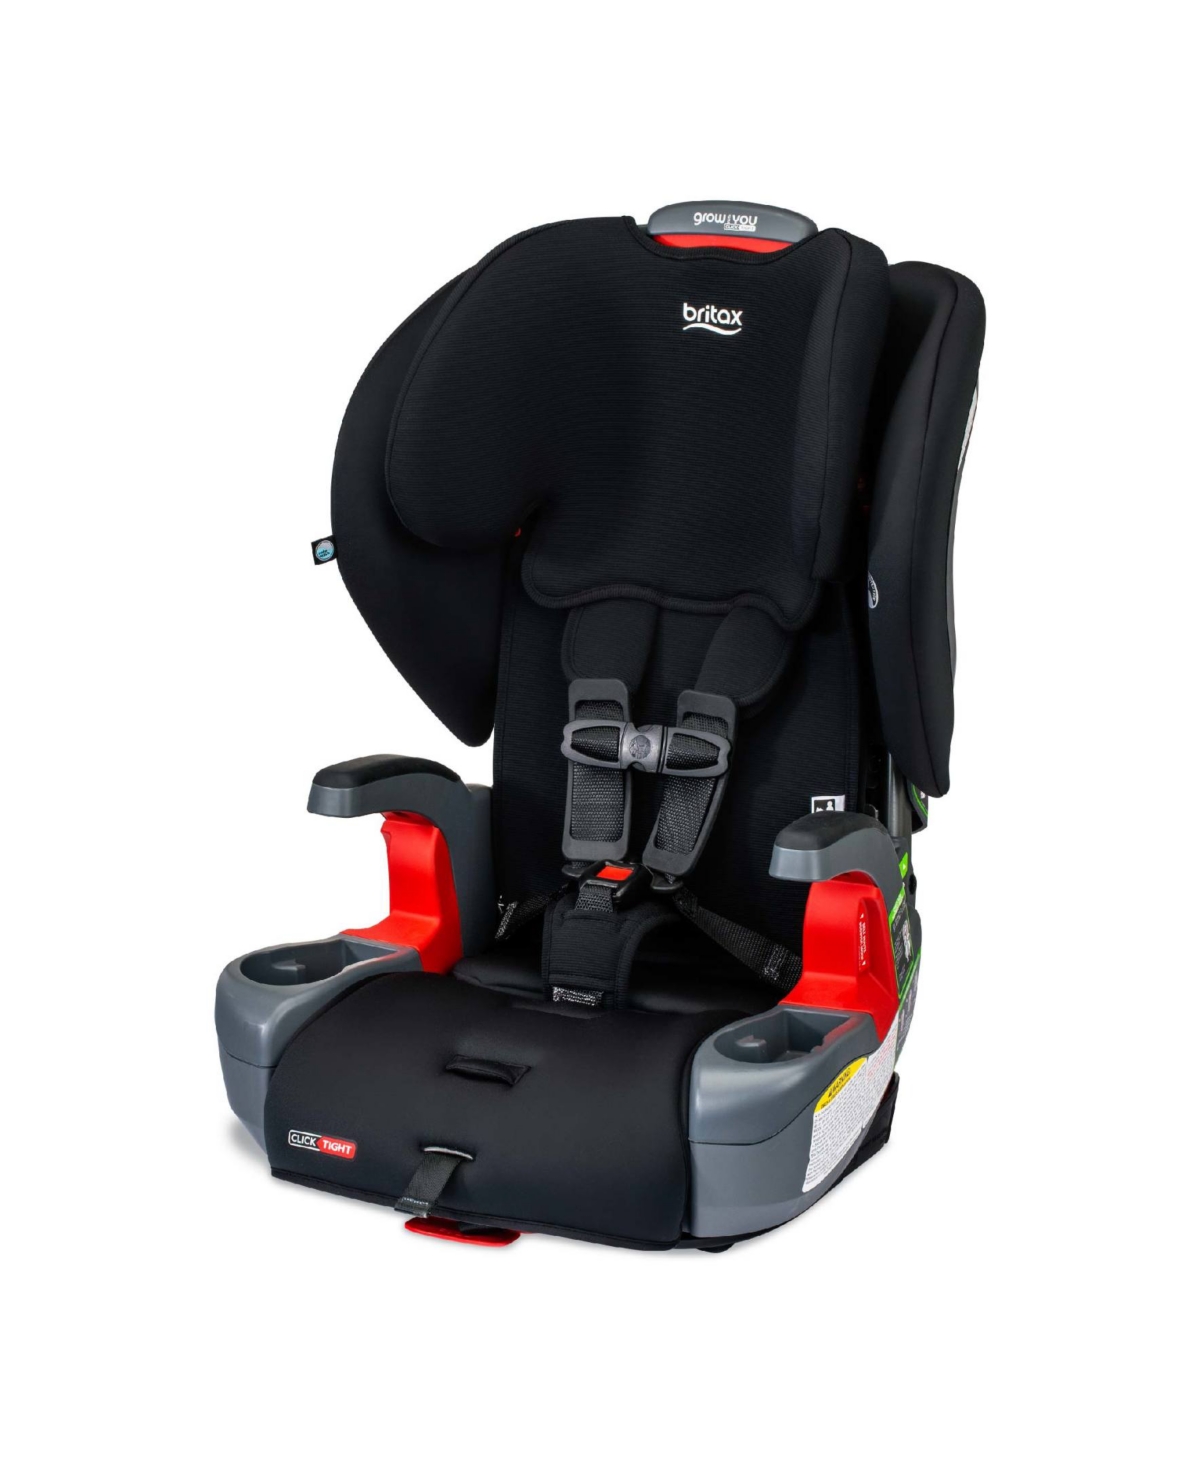 Britax Grow With You Click Tight Harness-2-booster In Black Contour